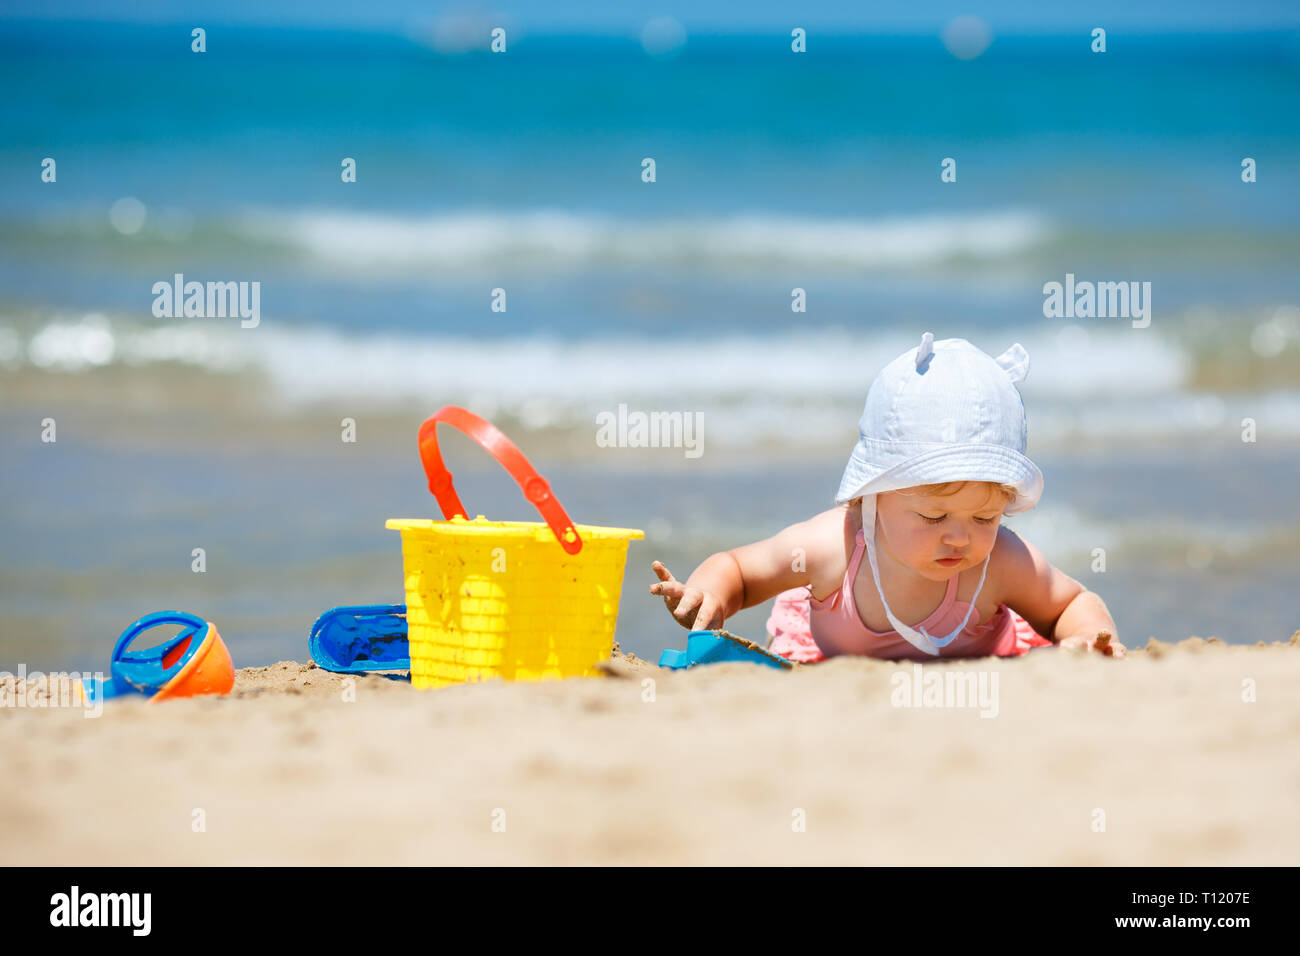 Child playing on tropical beach. Little girl digging sand at sea shore. Family summer vacation. Kids play with sand toys. Travel with young children Stock Photo